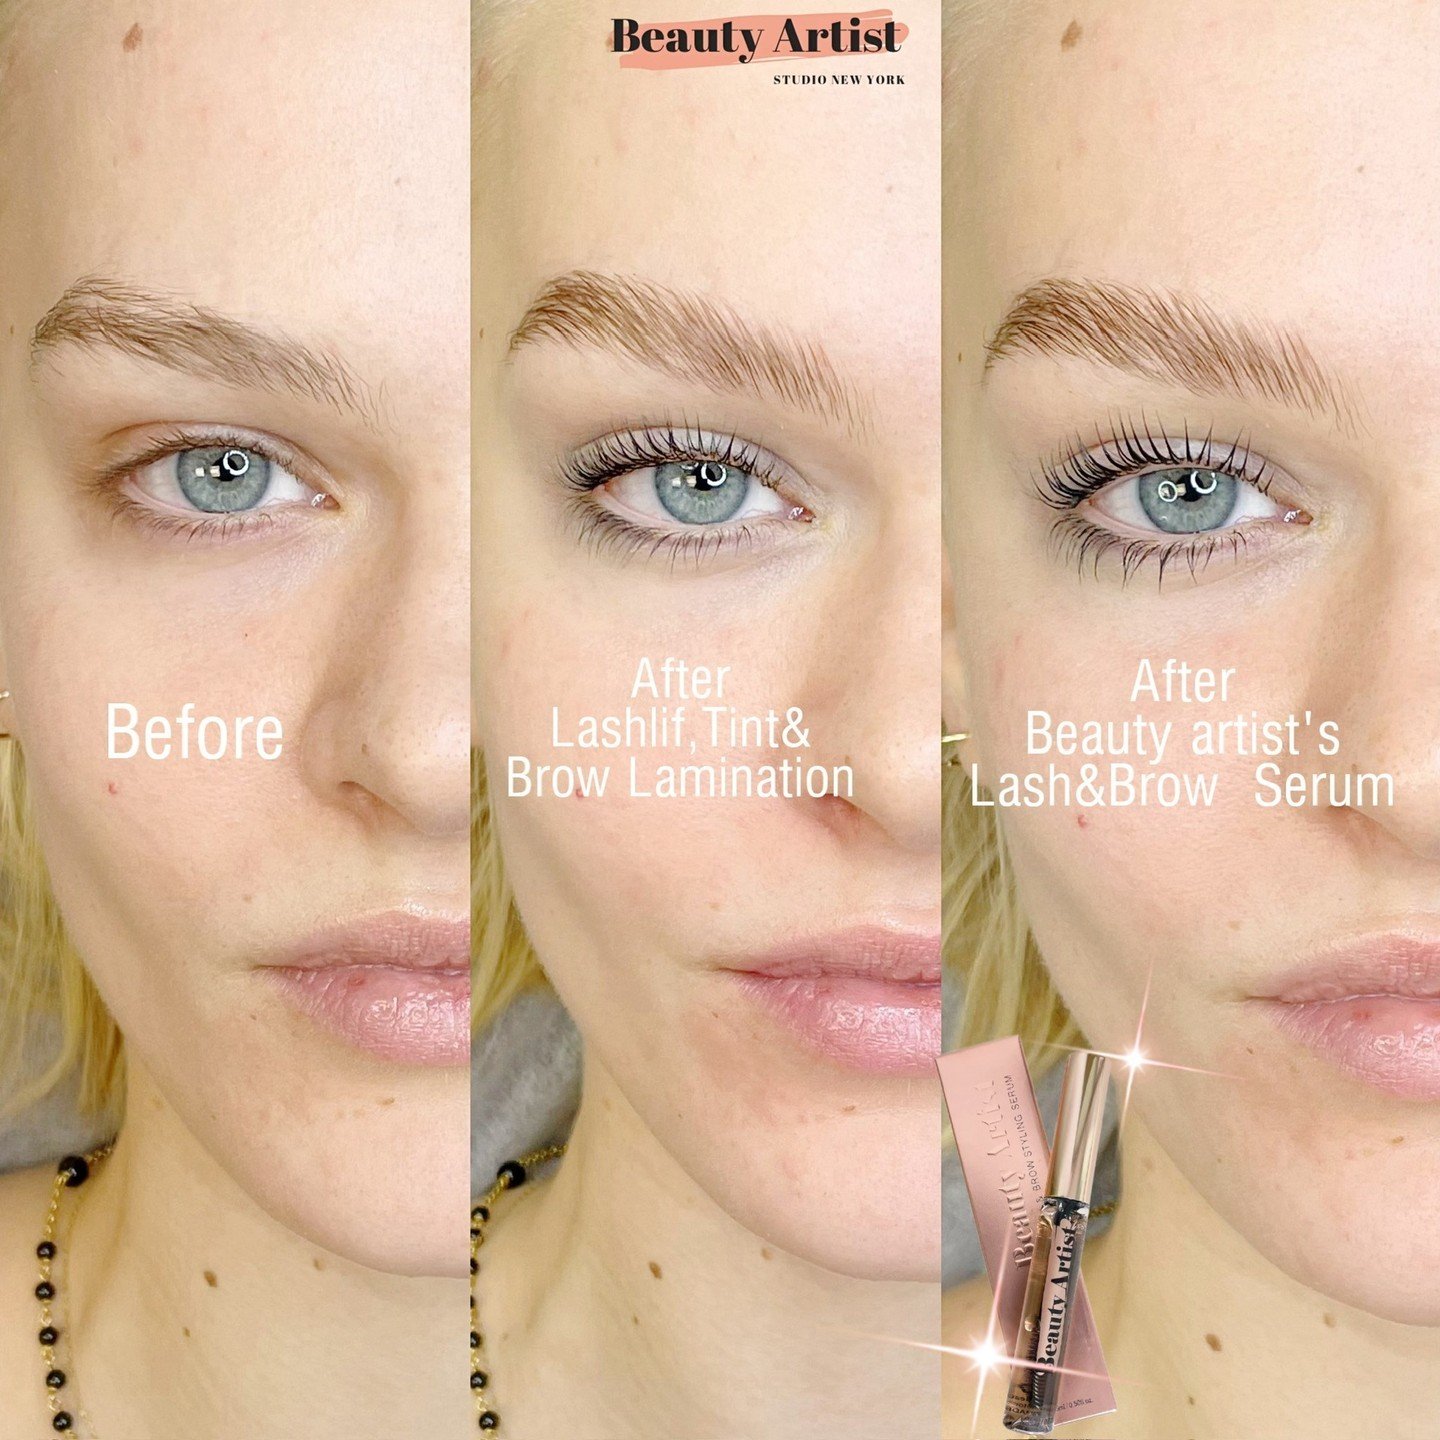 Attention, beautiful souls! 🌟 Have you noticed your lash lift not holding up as you hoped, or missing that just-done perfection? 👉️ It's time to discover the magic of 𝐁𝐞𝐚𝐮𝐭𝐲 𝐀𝐫𝐭𝐢𝐬𝐭'𝐬 𝐋𝐚𝐬𝐡𝐞𝐬 &amp; 𝐁𝐫𝐨𝐰𝐬 𝐒𝐭𝐲𝐥𝐢𝐧𝐠 𝐒𝐞𝐫?